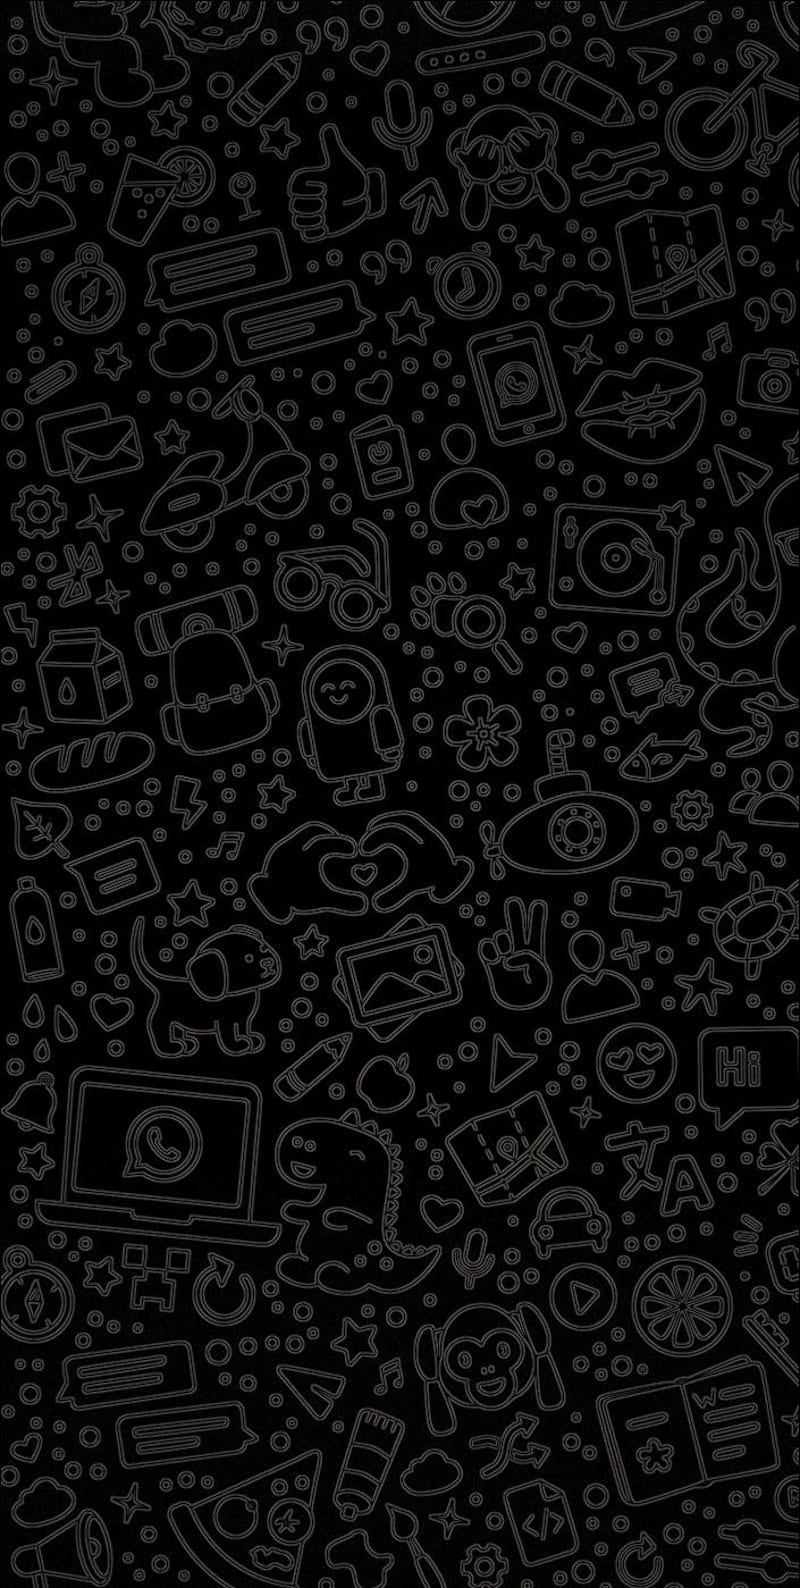 IPhone wallpaper with a pattern of white line drawings of various objects and animals on a black background - Doodles